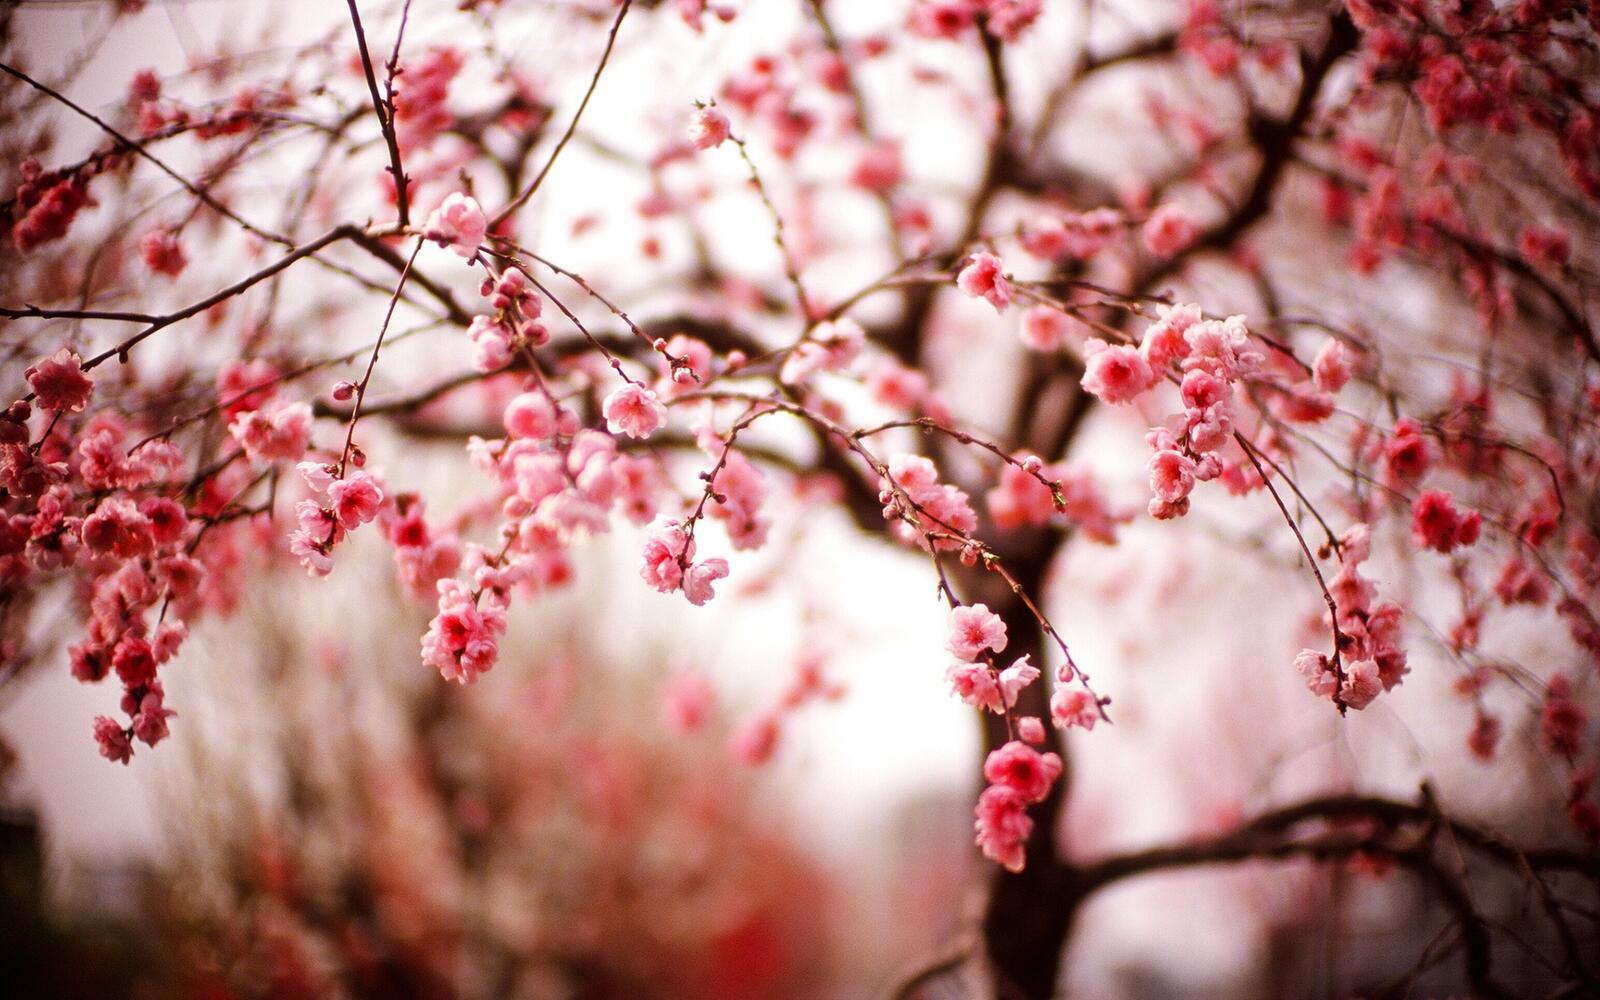 Wallpapers wallpaper cherry blossom branches blurred on the desktop